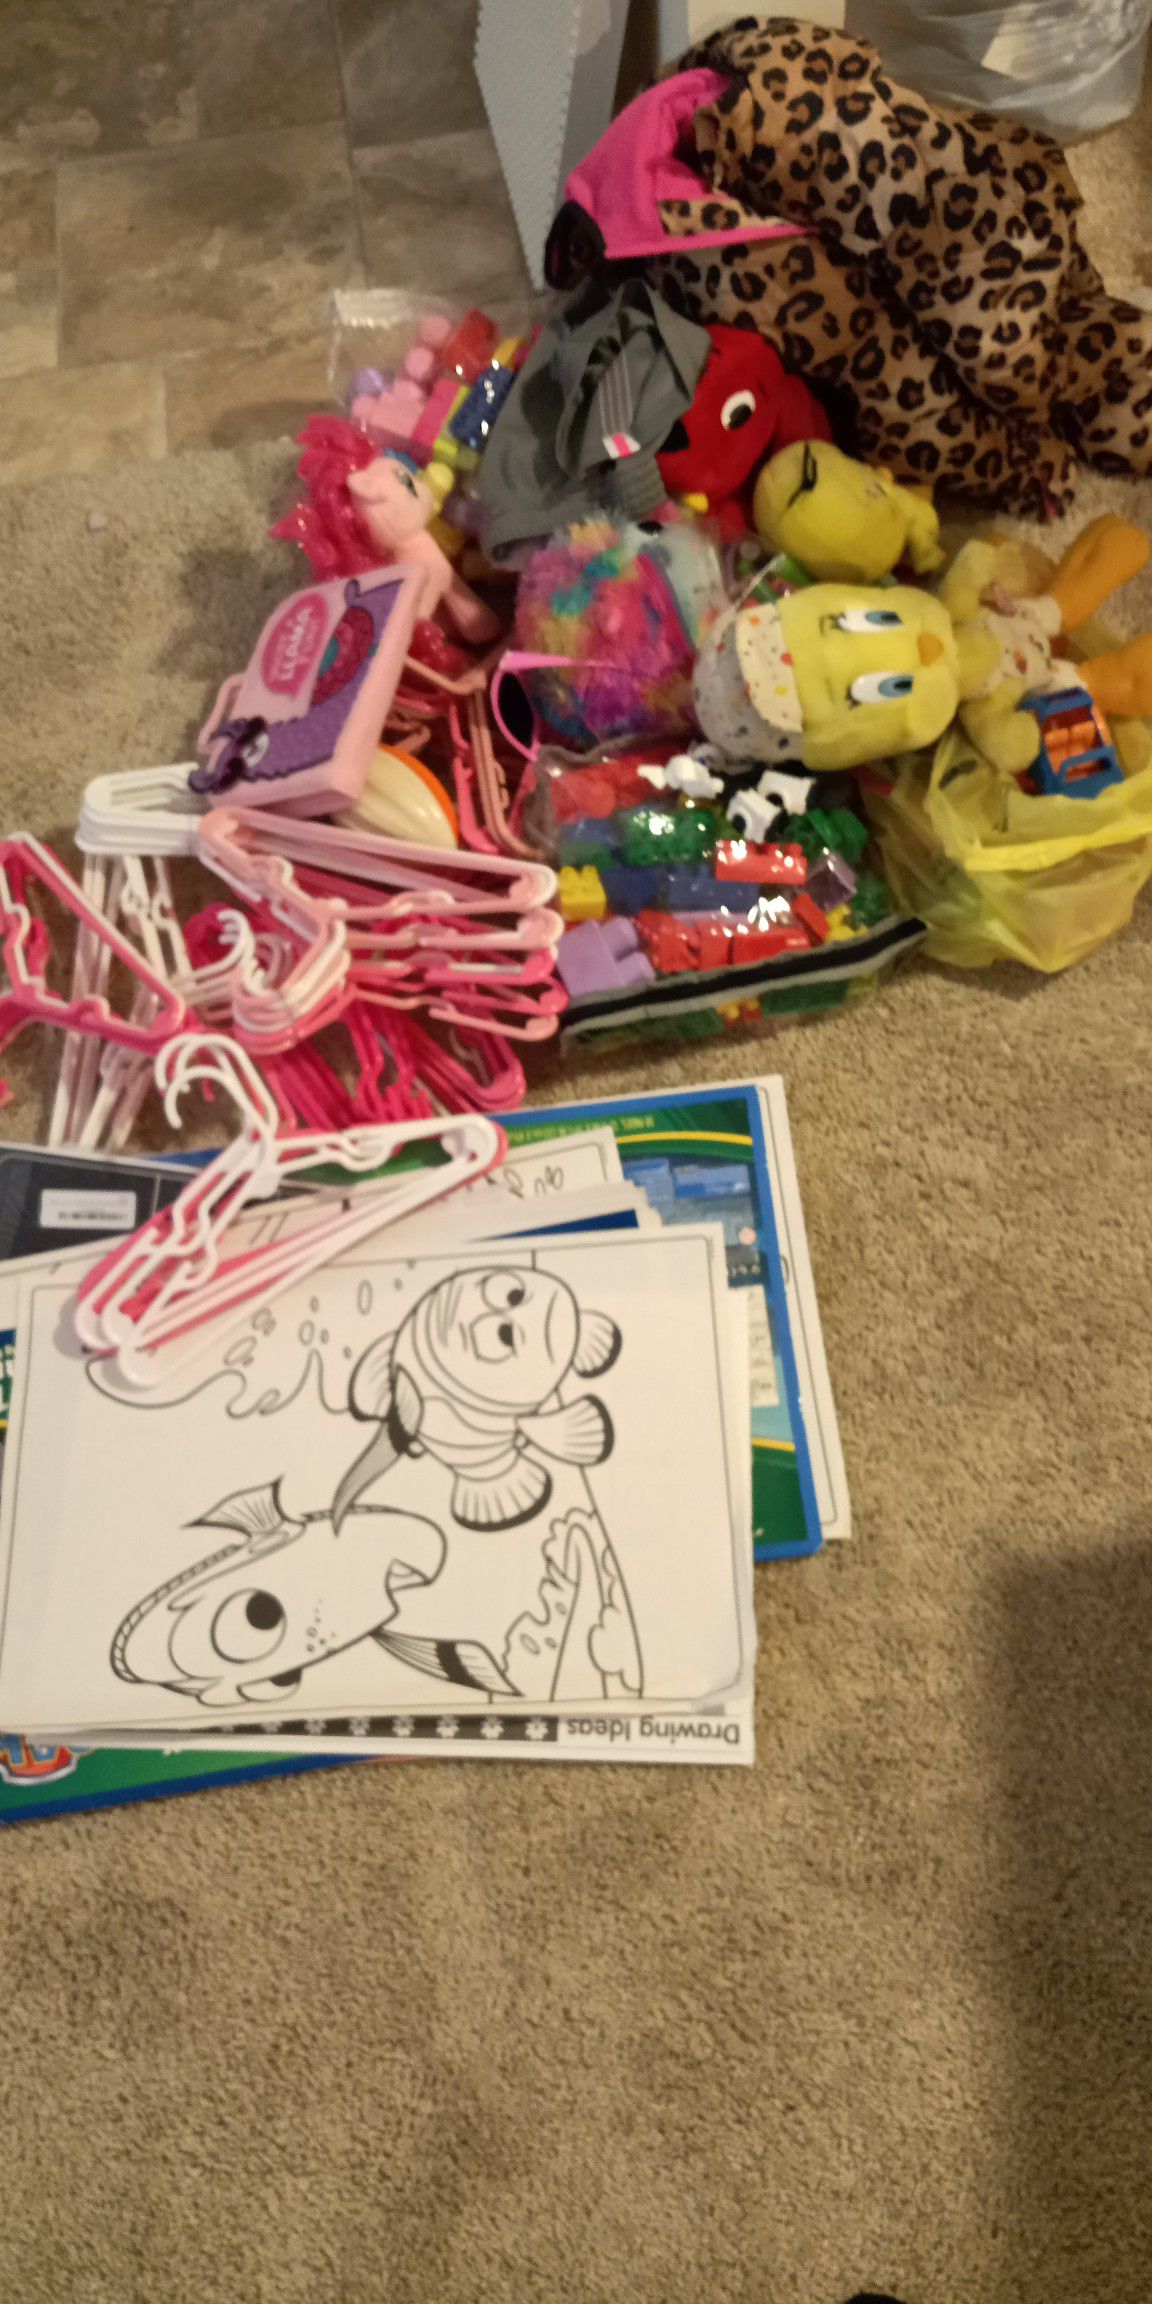 FREE: Girls toys and accessories 4-7 years old